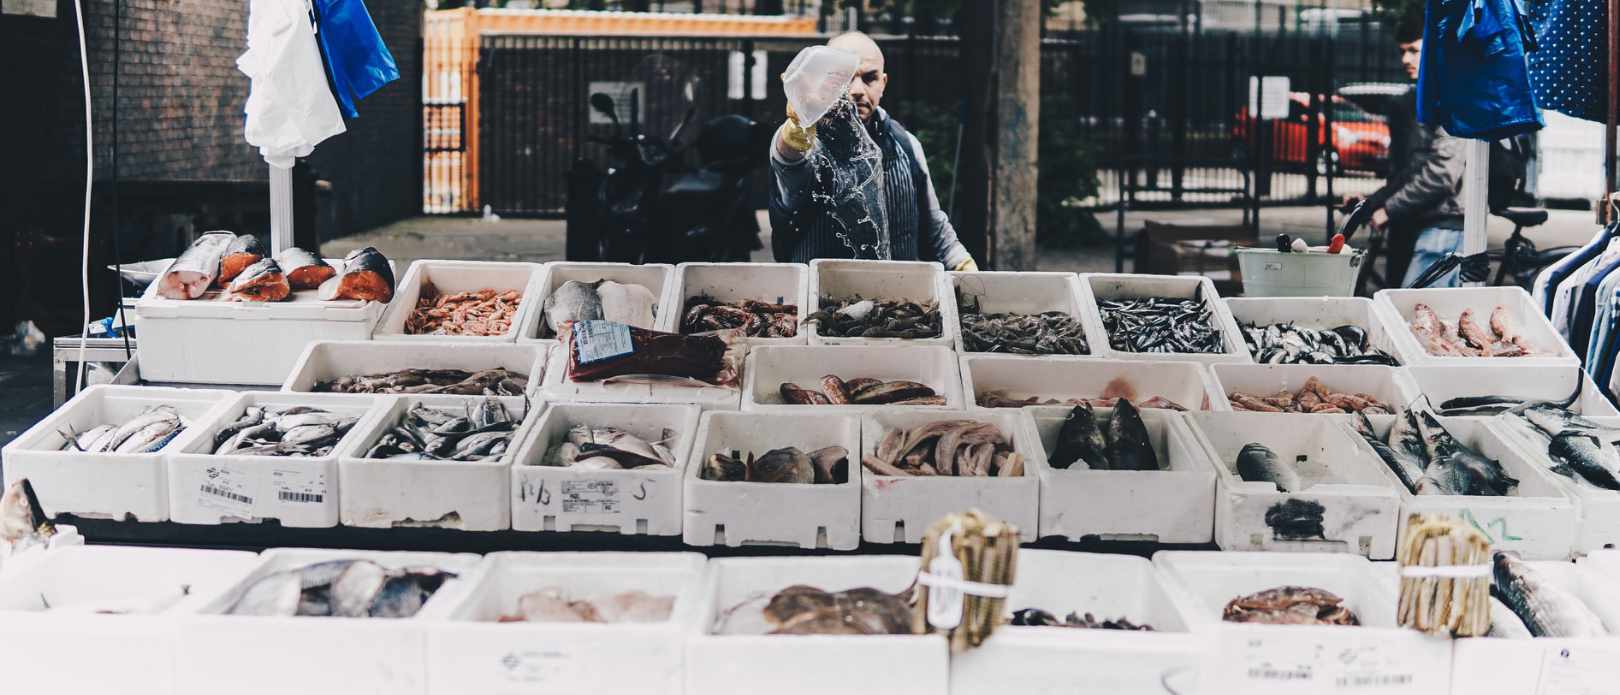  Man standing behind stall selling various fish.